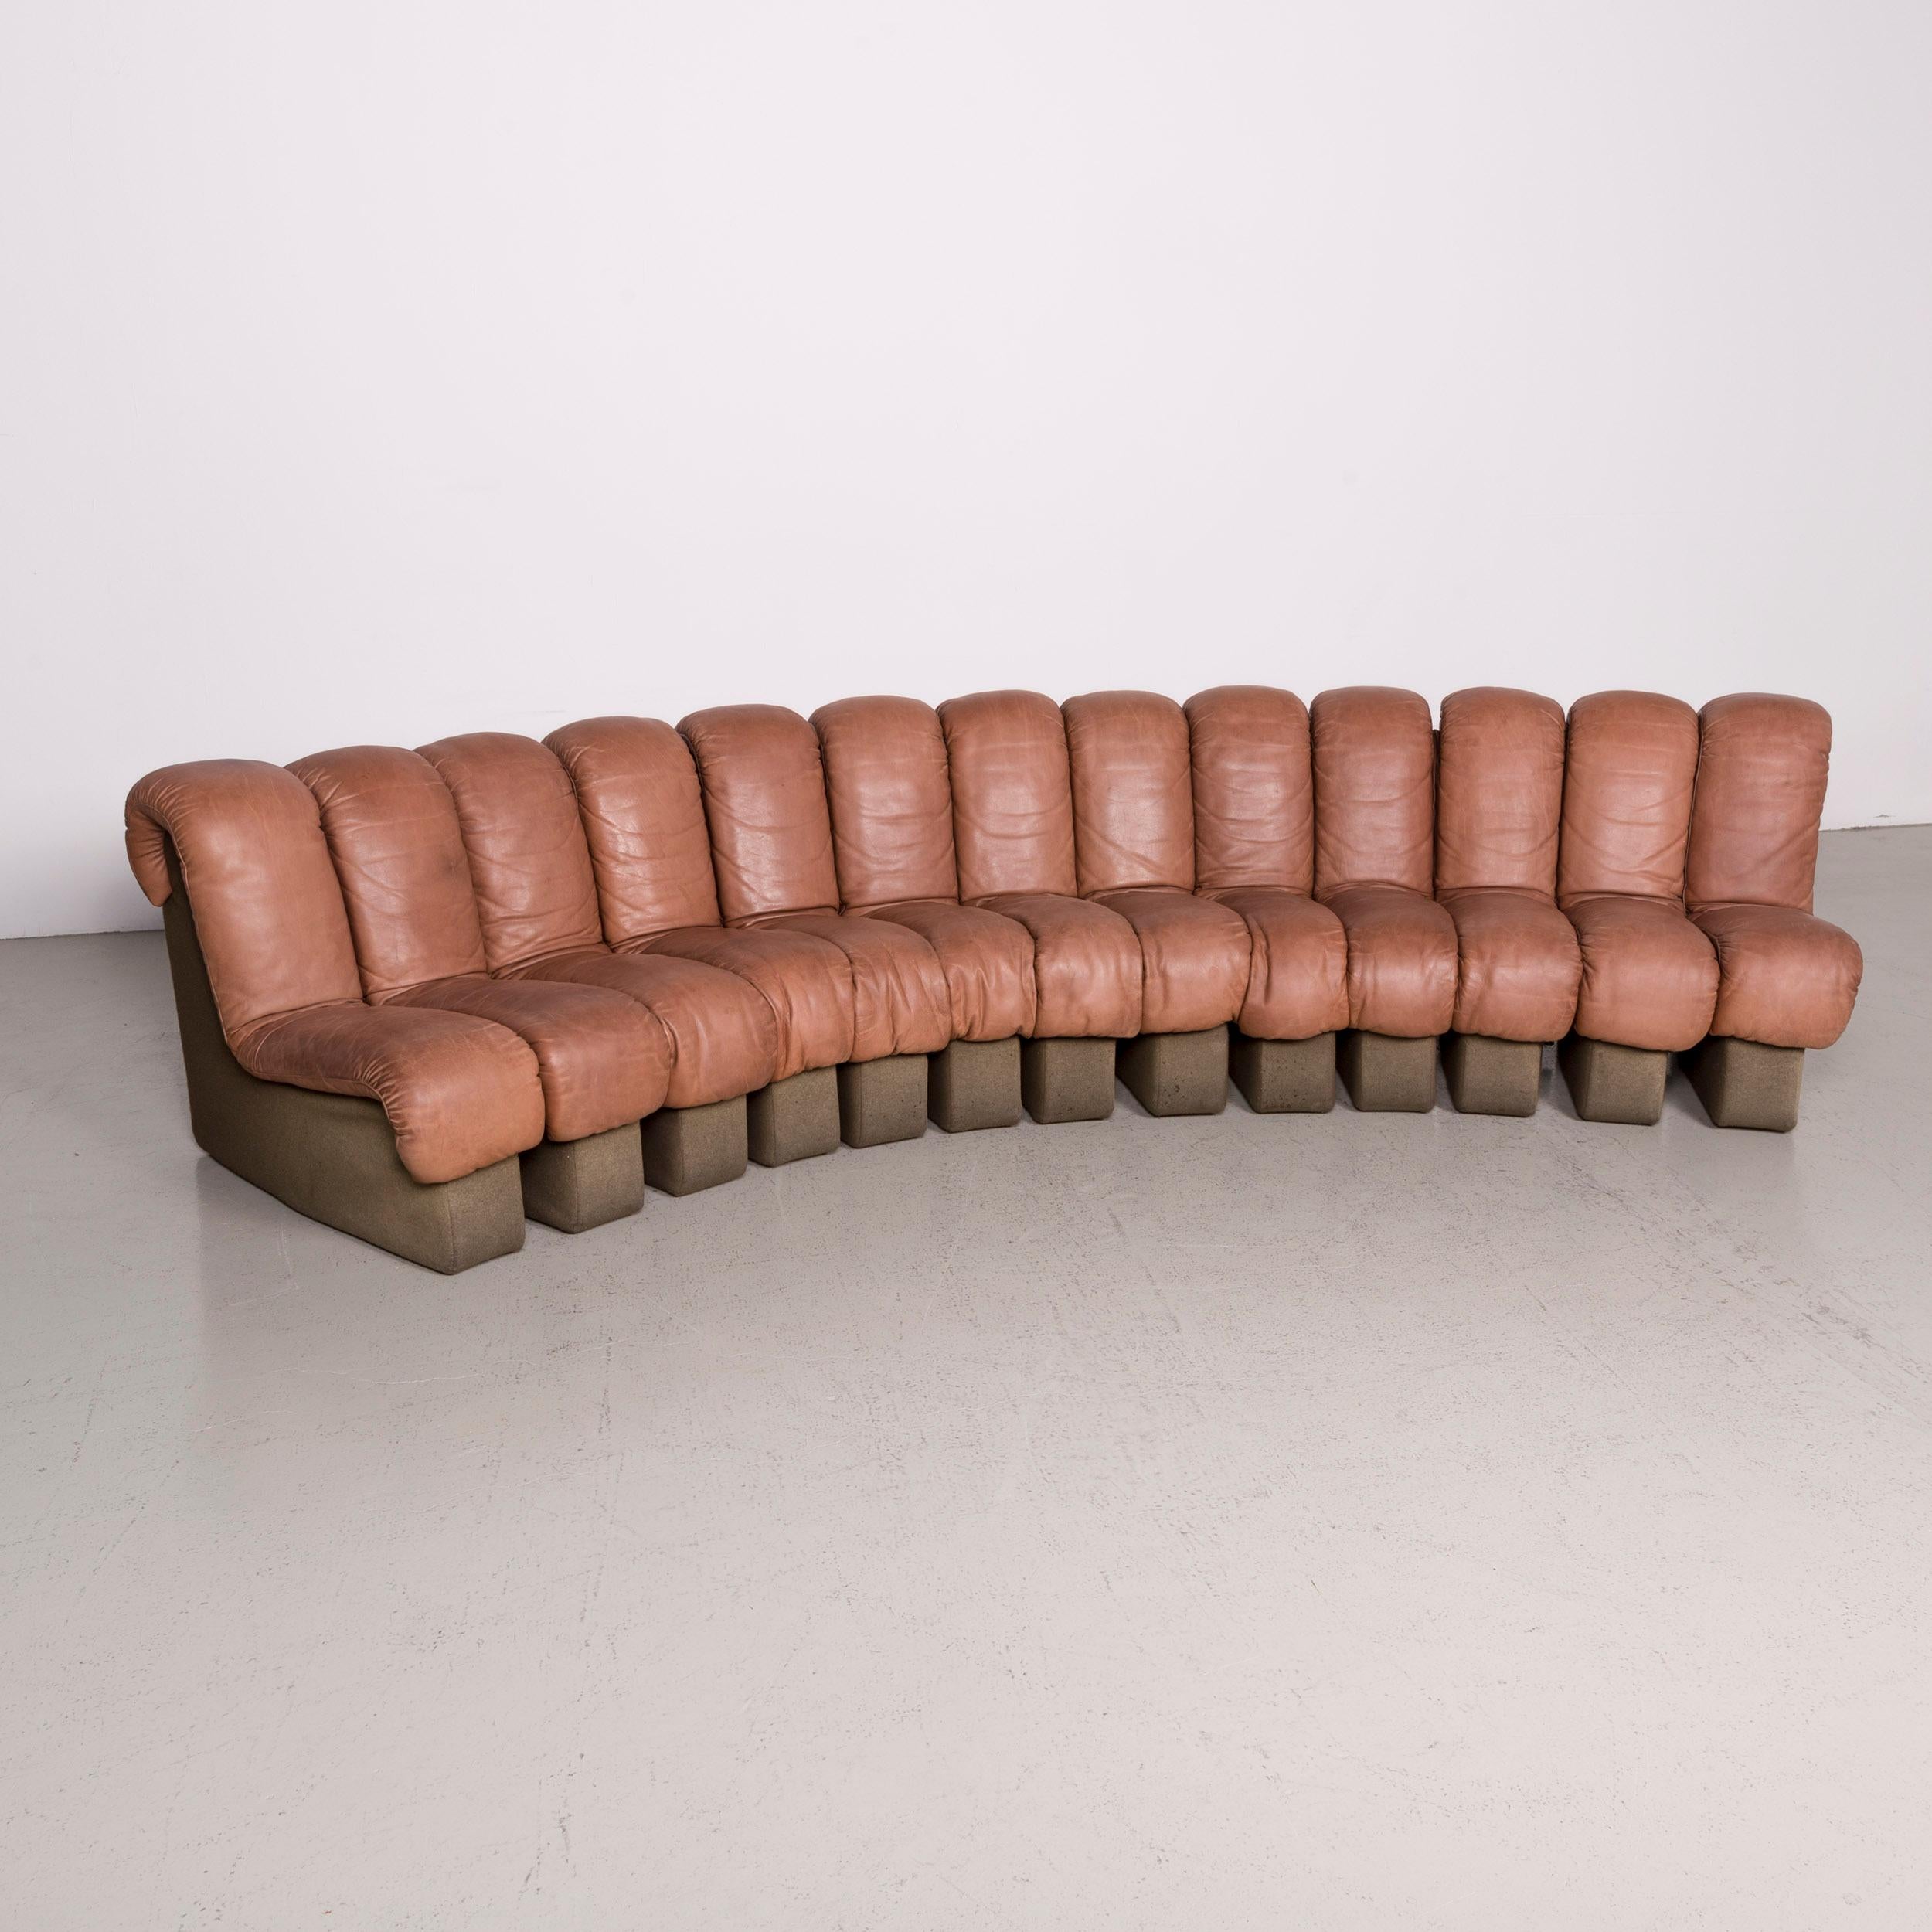 We bring to you a de Sede DS 600 designer leather sofa brown by Berger, Peduzzi Riva, Ulrich &.

Product measurements in centimeters:

Depth 95
Width 340
Height 75
Seat-height 40
Seat-depth 57
Seat-width 340
Back-height 45.

  